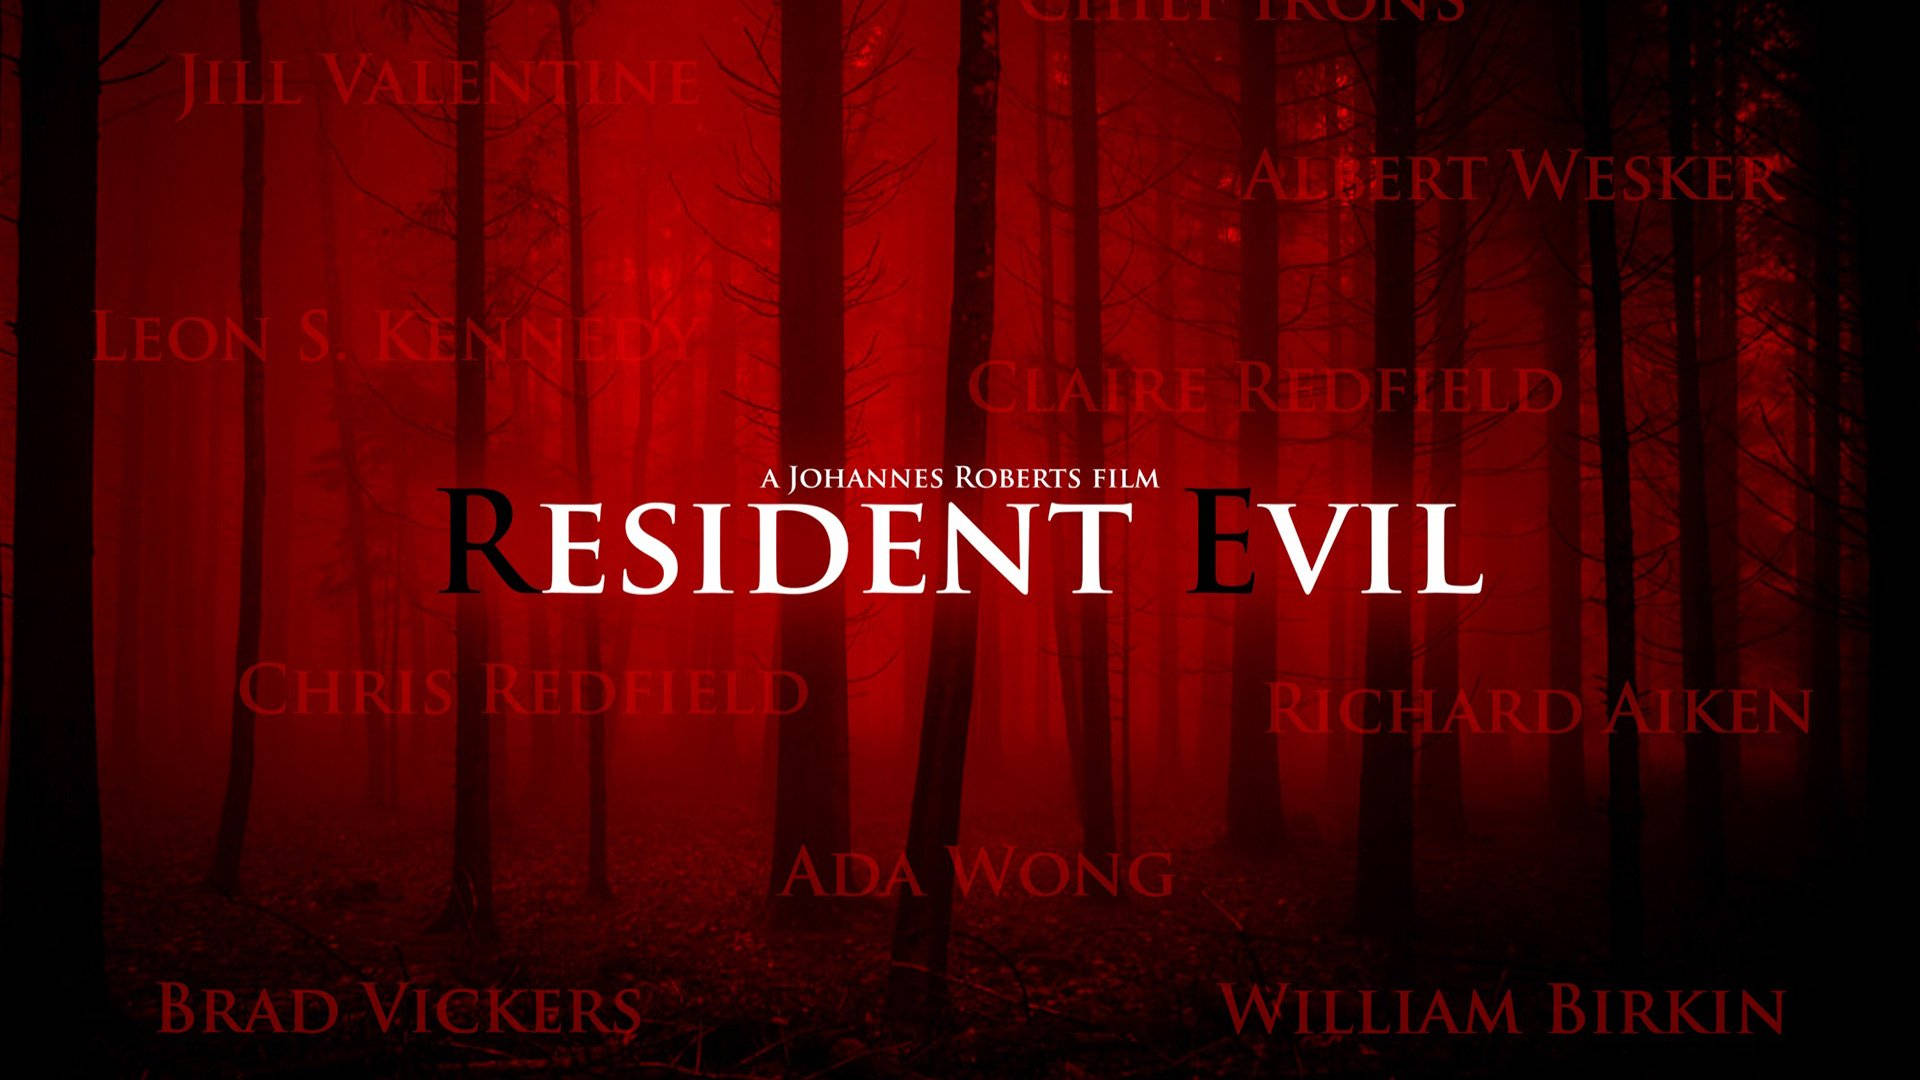 Resident Evil Welcome To Raccoon City Names Wallpaper